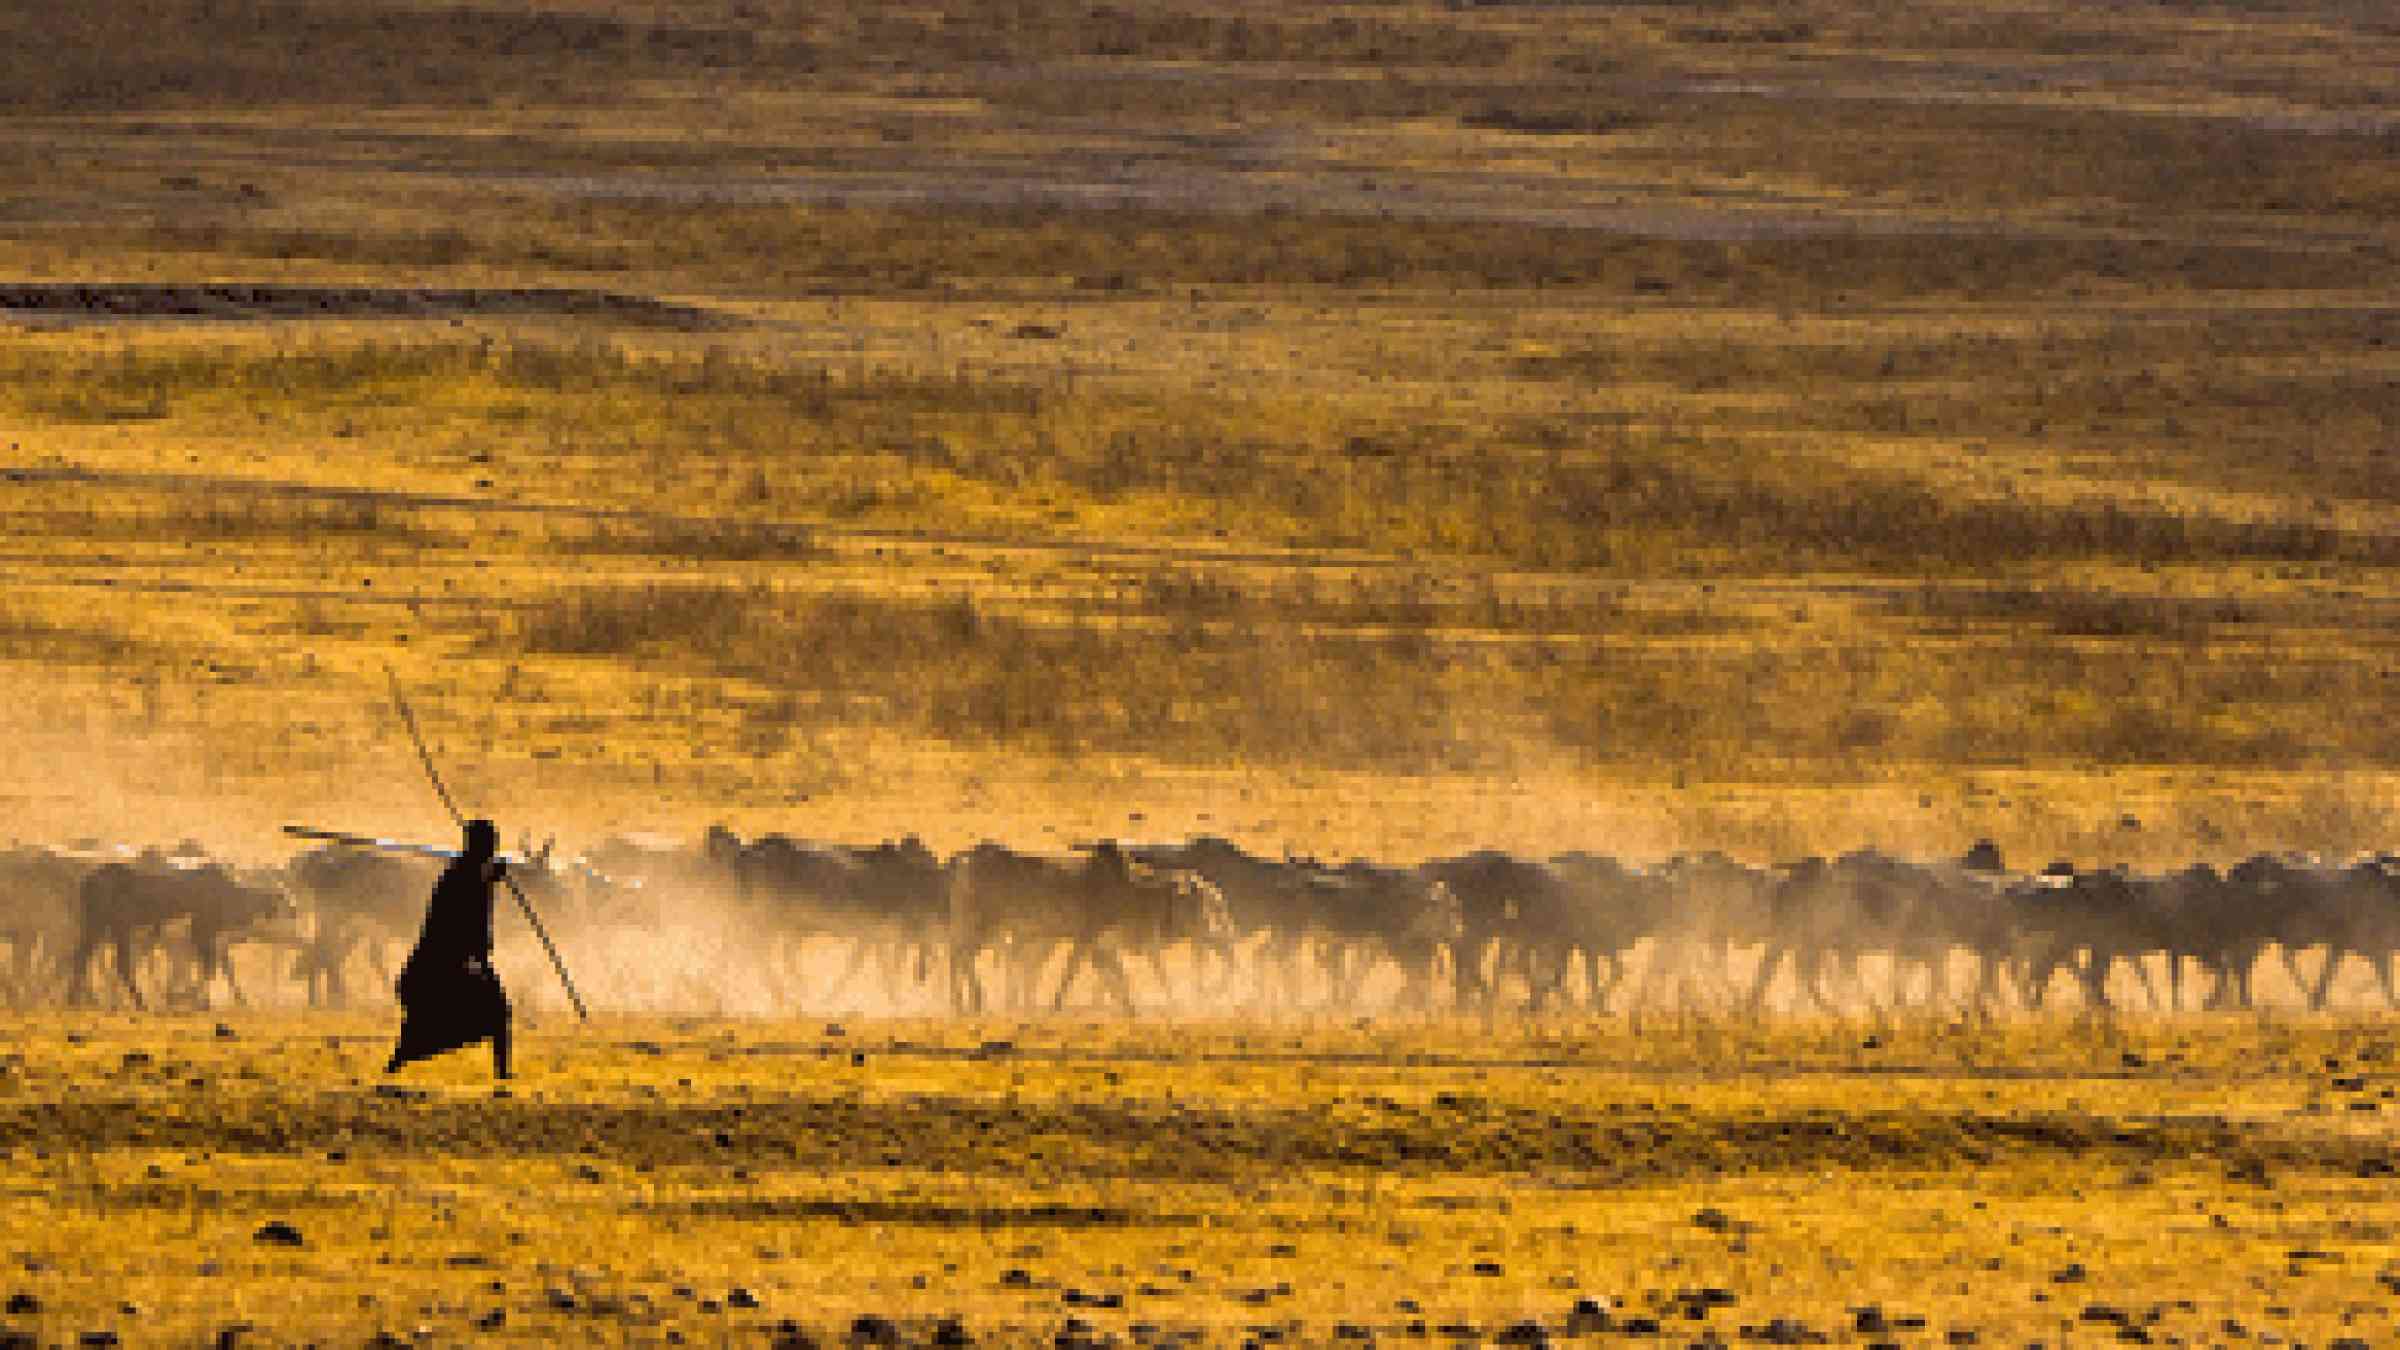 Maasai and herd photo by flickr user Joe Liao, https://www.flickr.com/photos/czliao/2896753290, CC BY-NC-SA 2.0